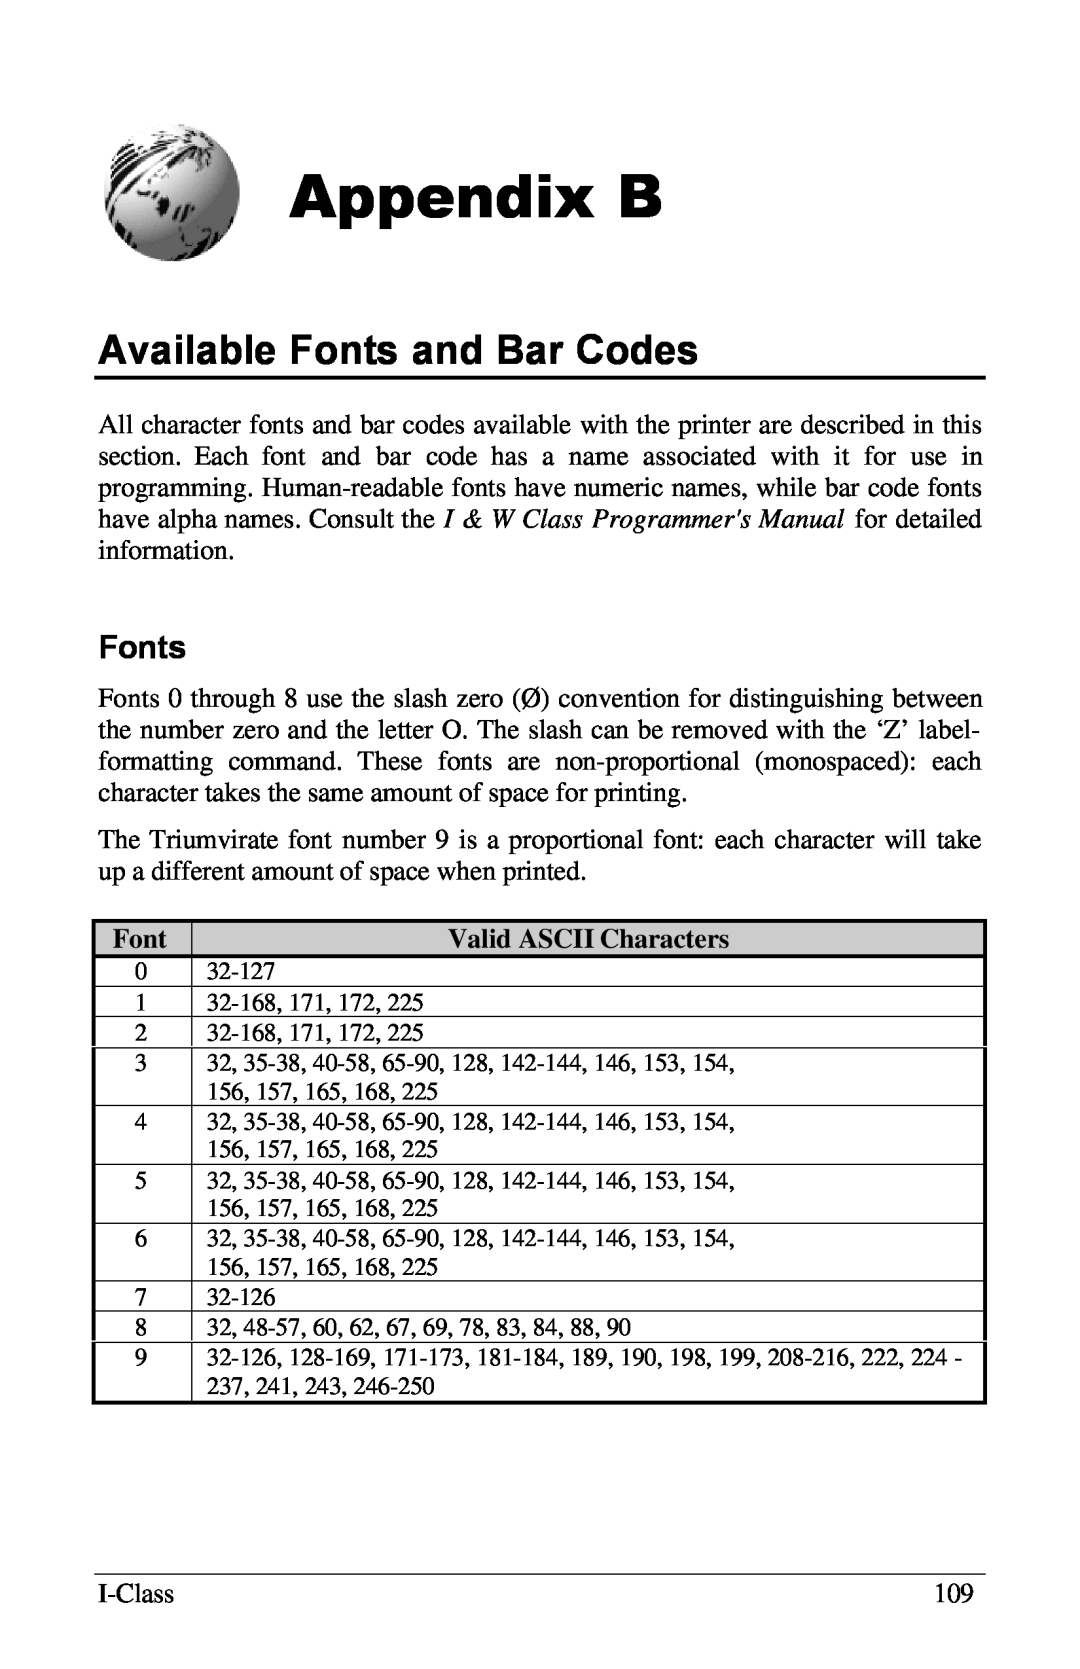 Xerox I Class manual Appendix B, Available Fonts and Bar Codes, Valid ASCII Characters 